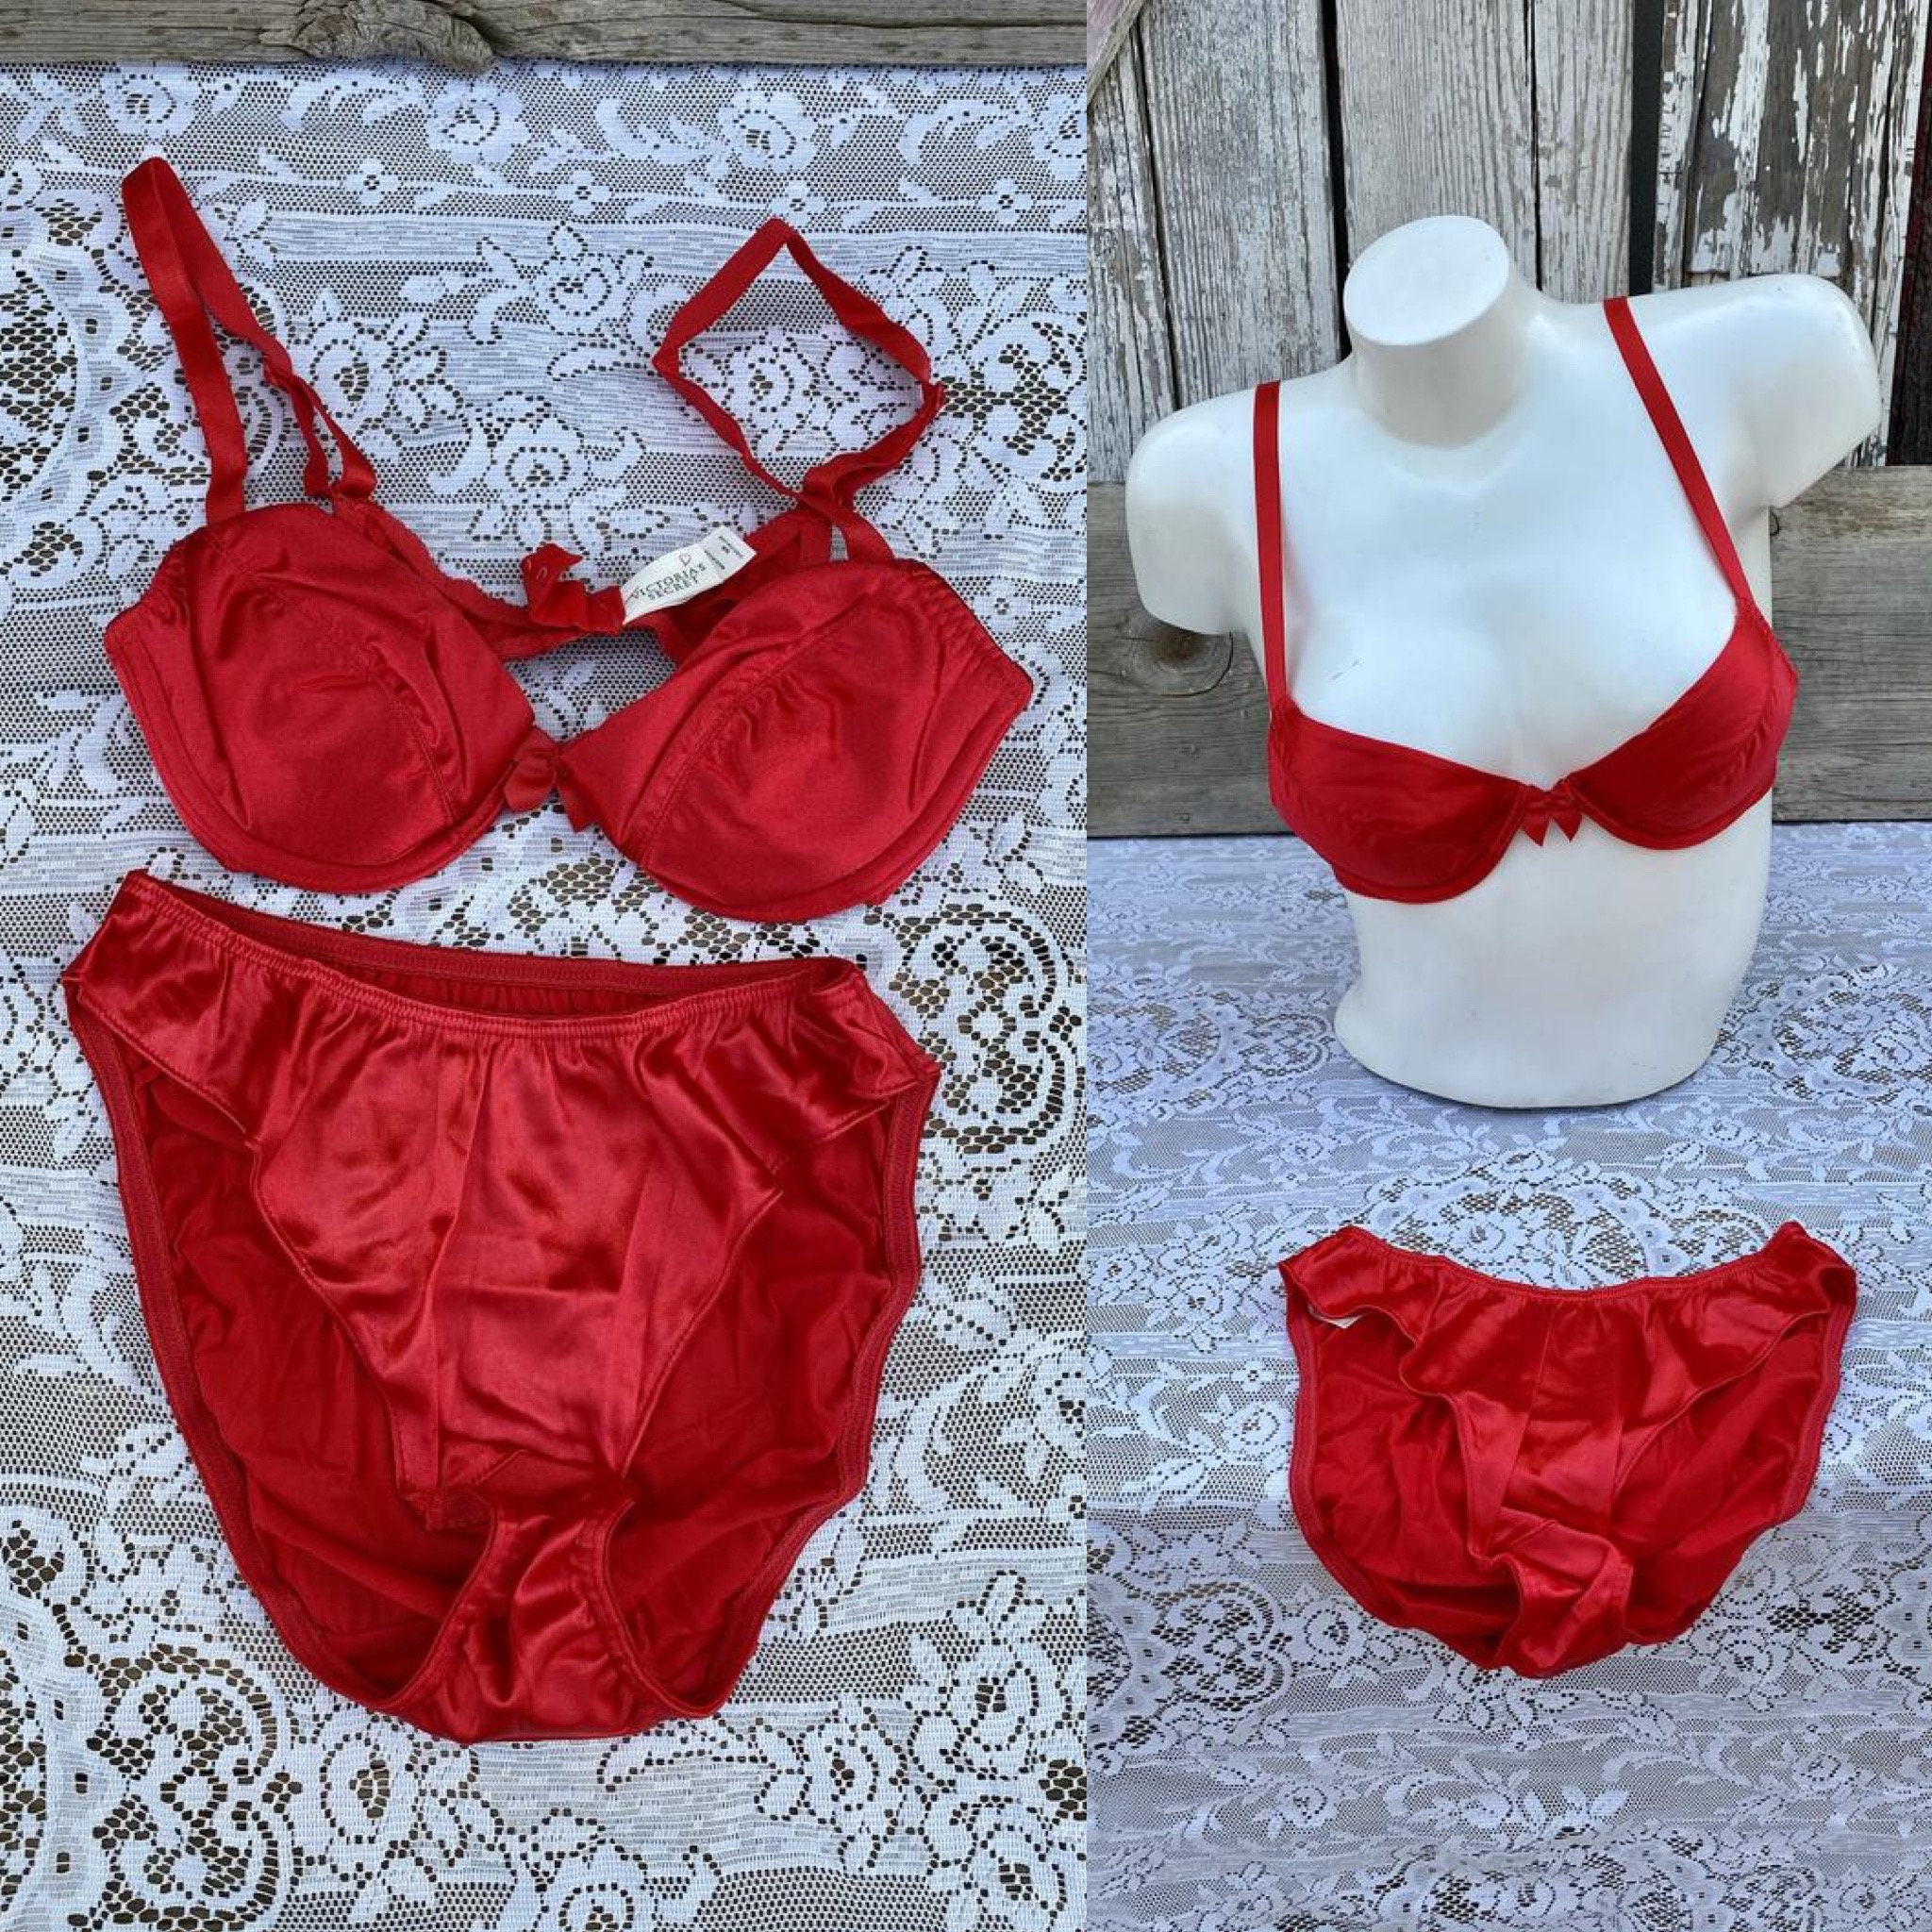 1995 Victoria's Secret 2 Piece Set Red Satin Miracle Bra 32B With